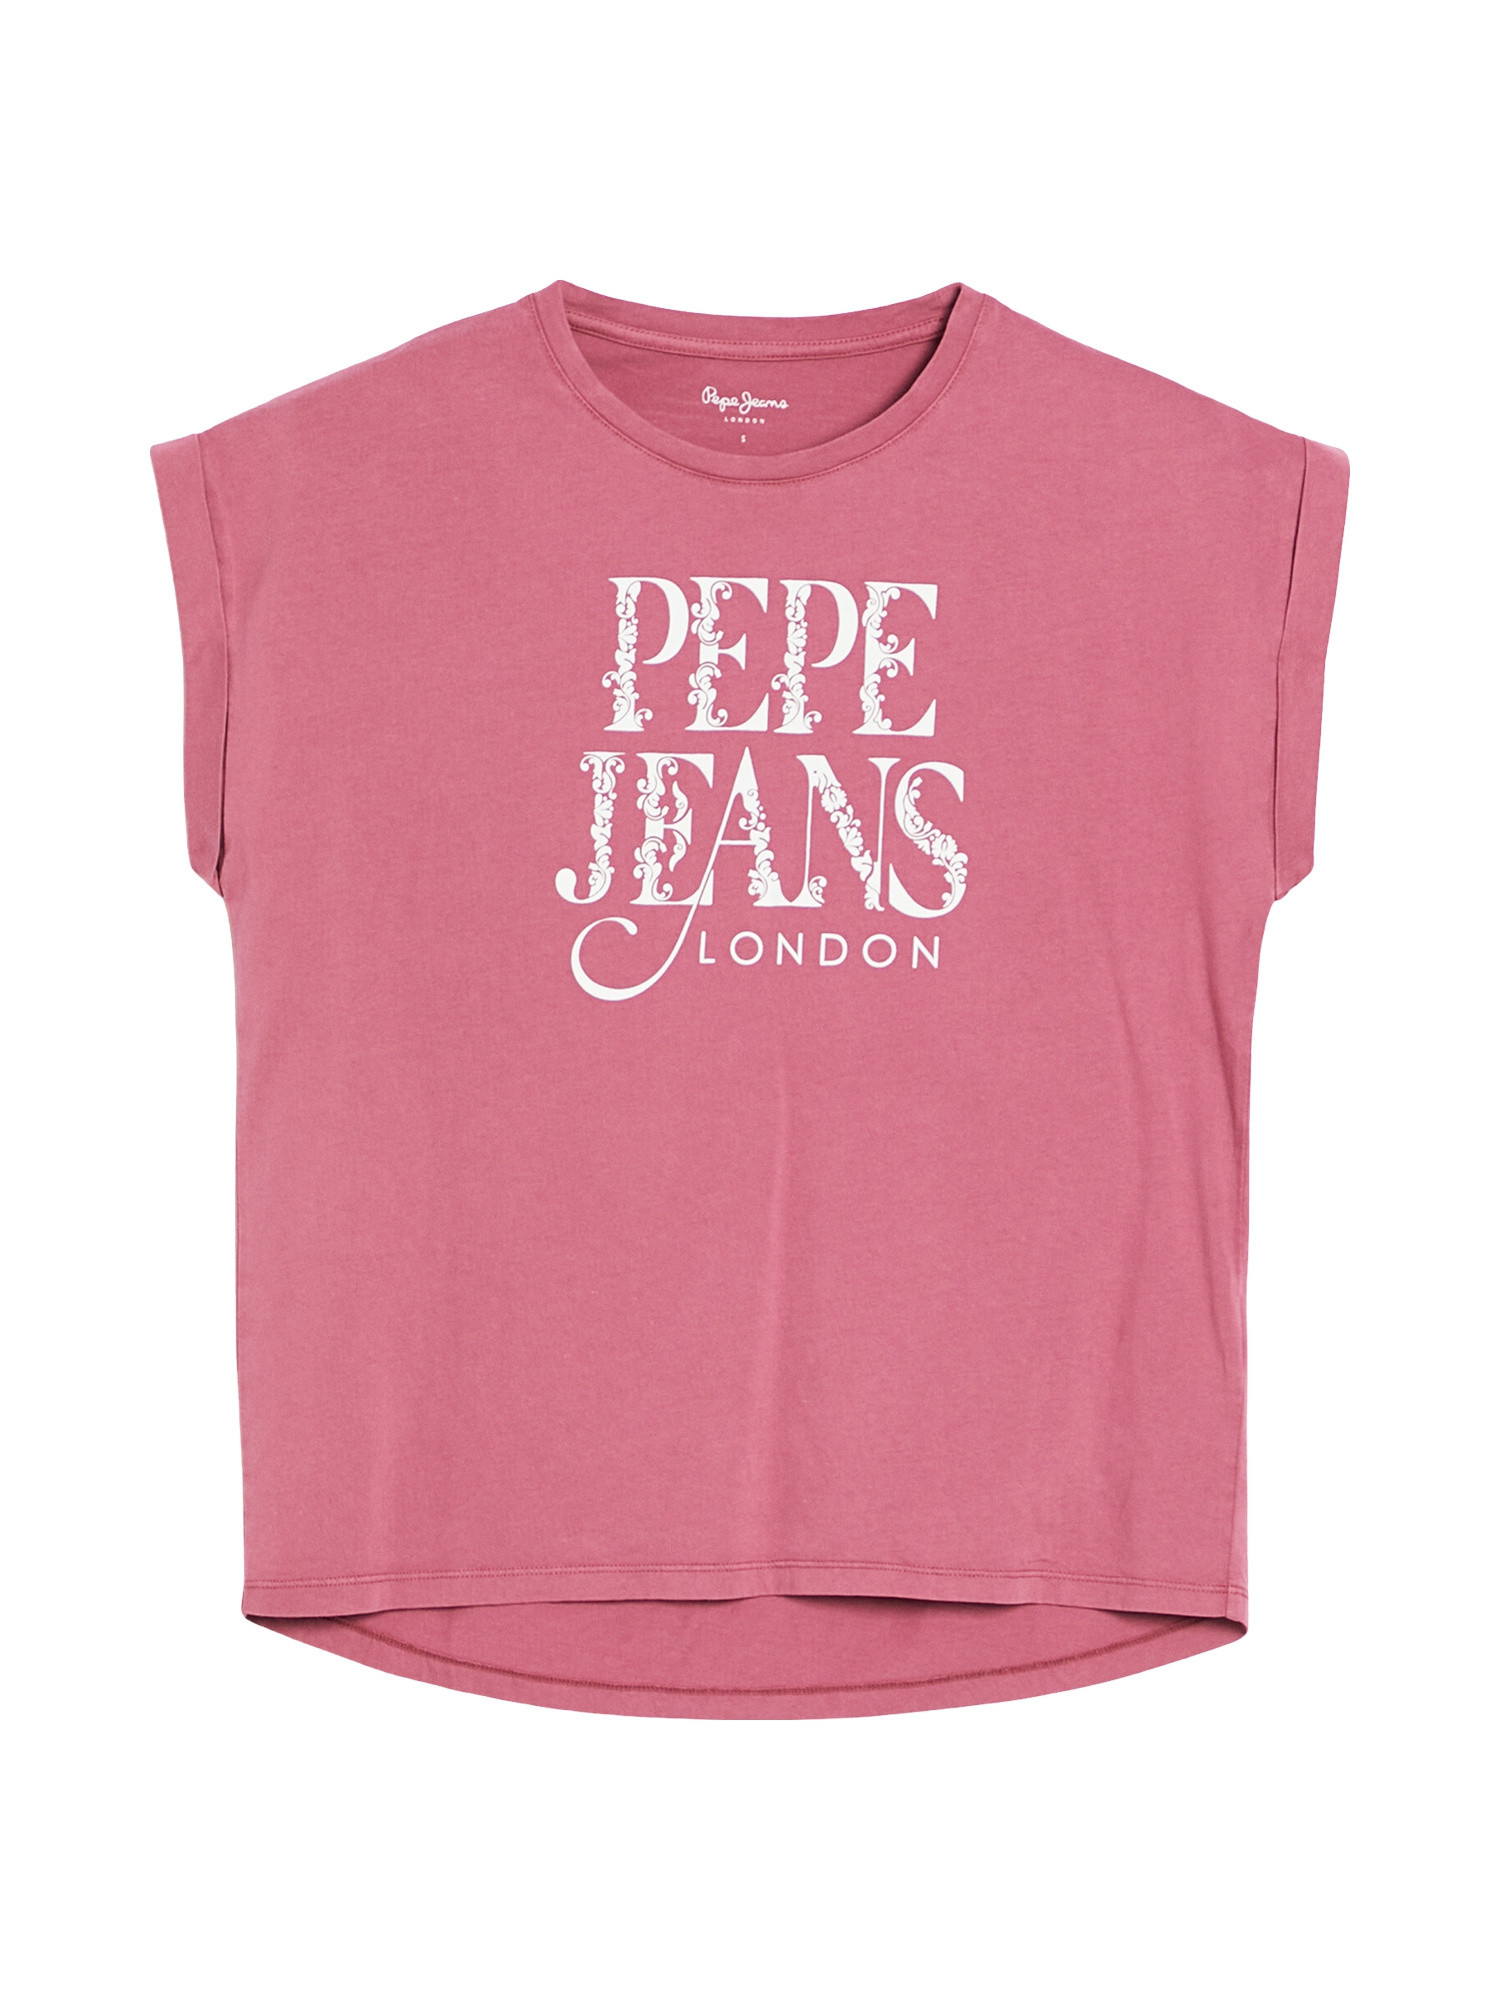 Pepe Jeans - T-shirt con logo in cotone, Rosa scuro, large image number 0